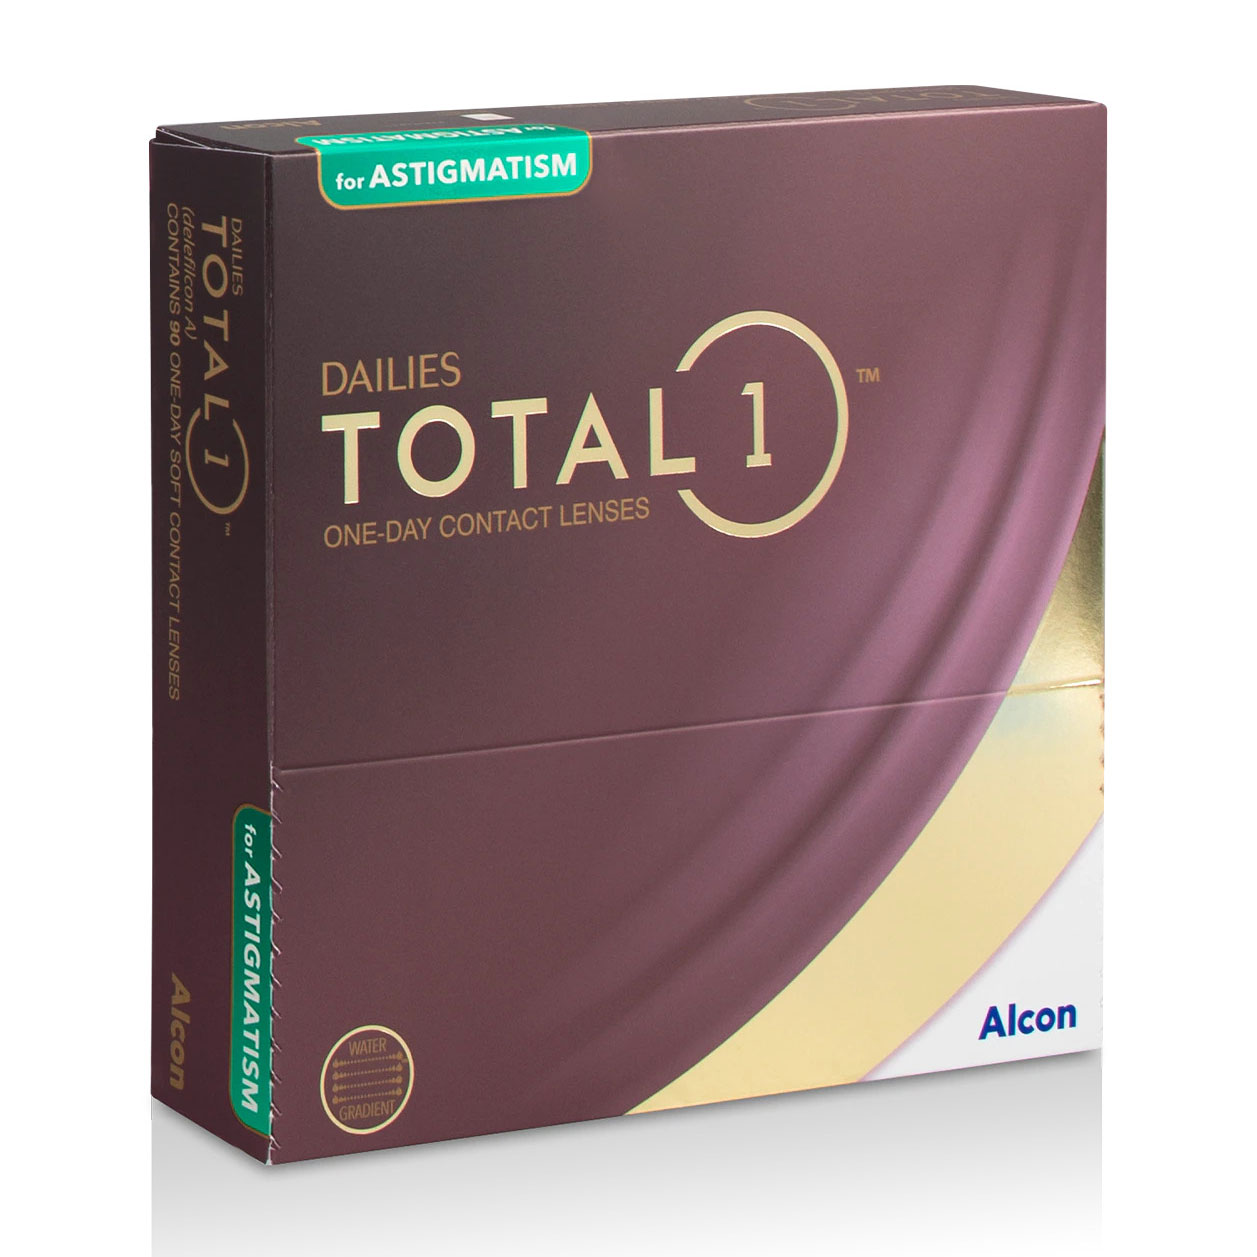 DAILIES TOTAL1® for ASTIGMATISM 90 szt.